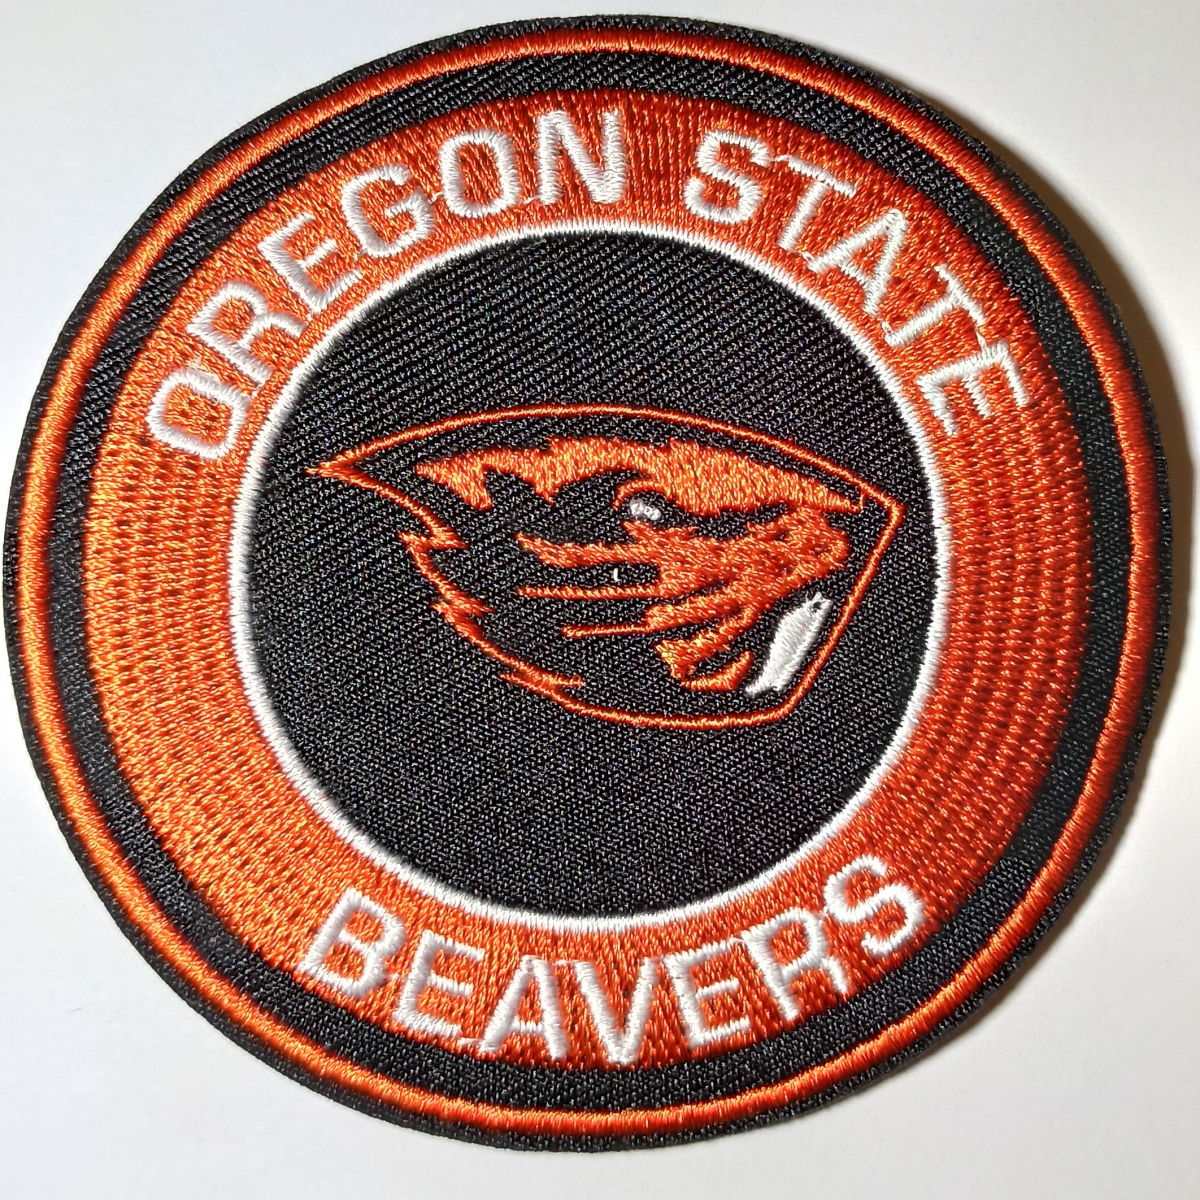 Velcro cloth hook and eye 52645 3.5 in. Dia. NCAA Oregon State University Oregon State Beavers Embroidered Patch